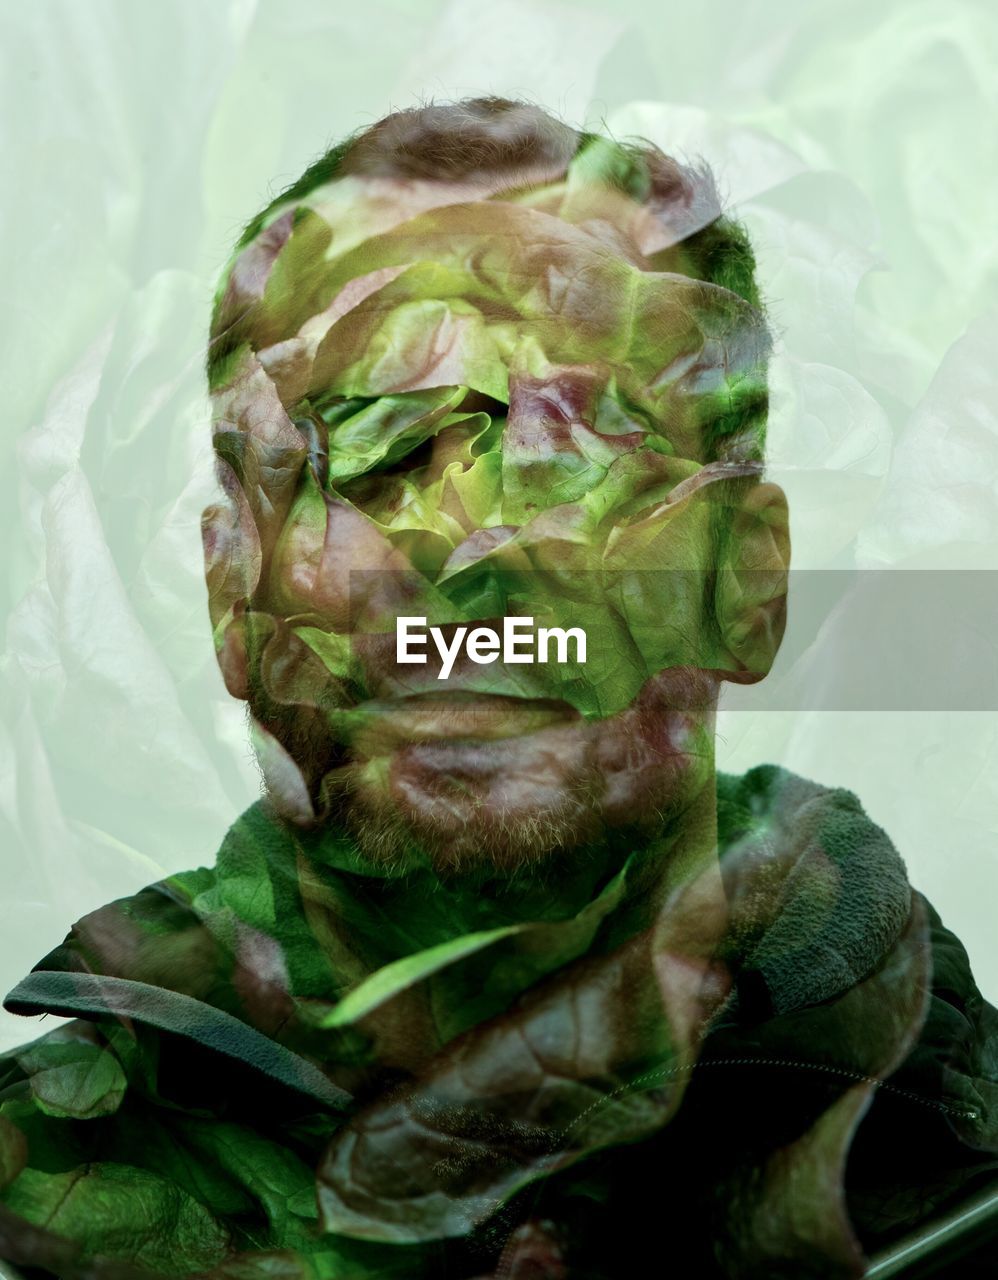 DOUBLE EXPOSURE IMAGE OF MAN WITH LEAF